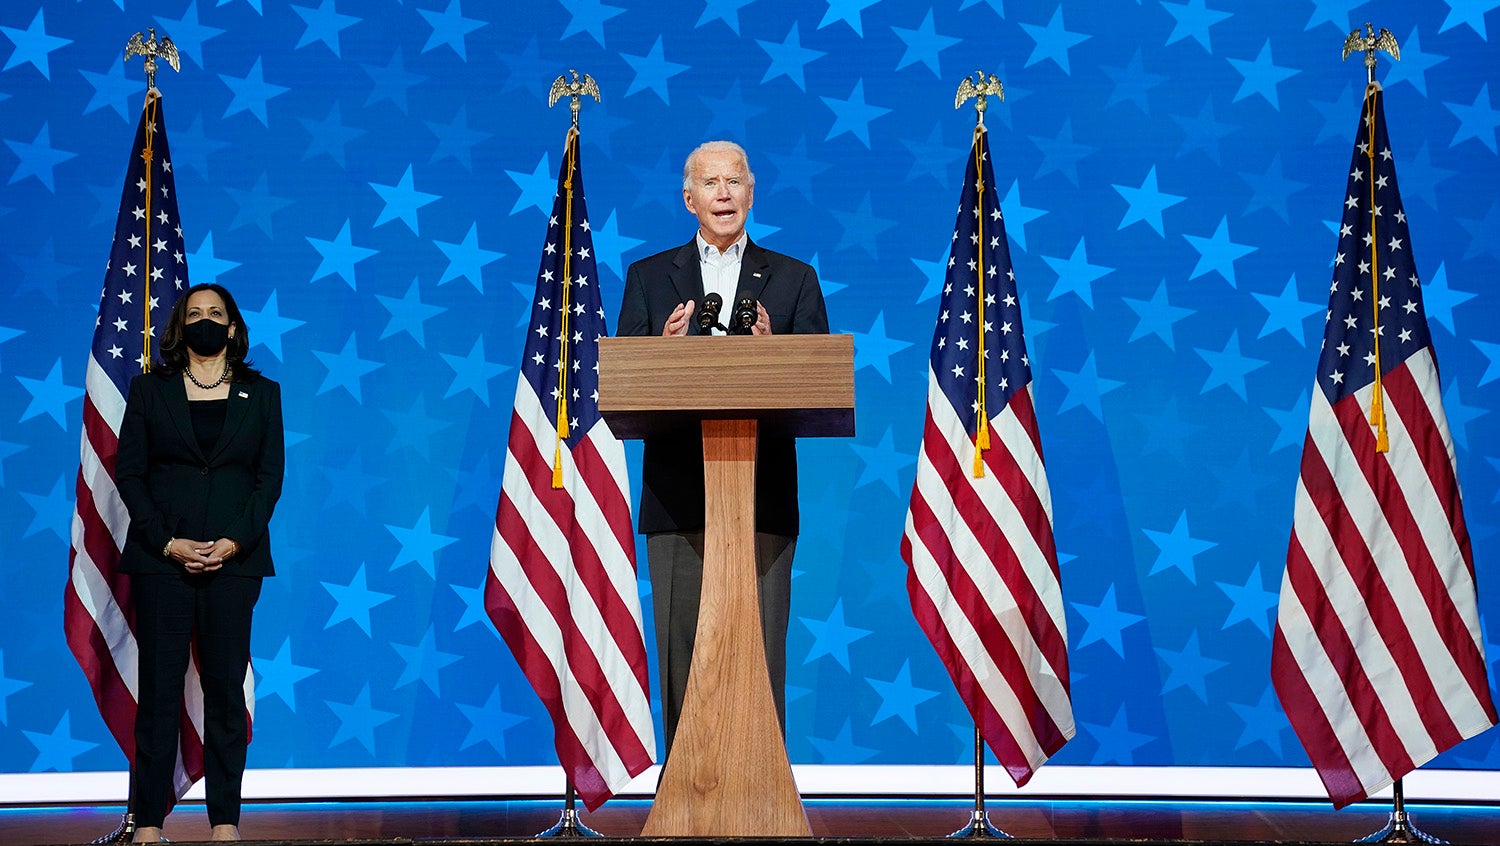 Biden and Harris stand on stage flanked by American flags